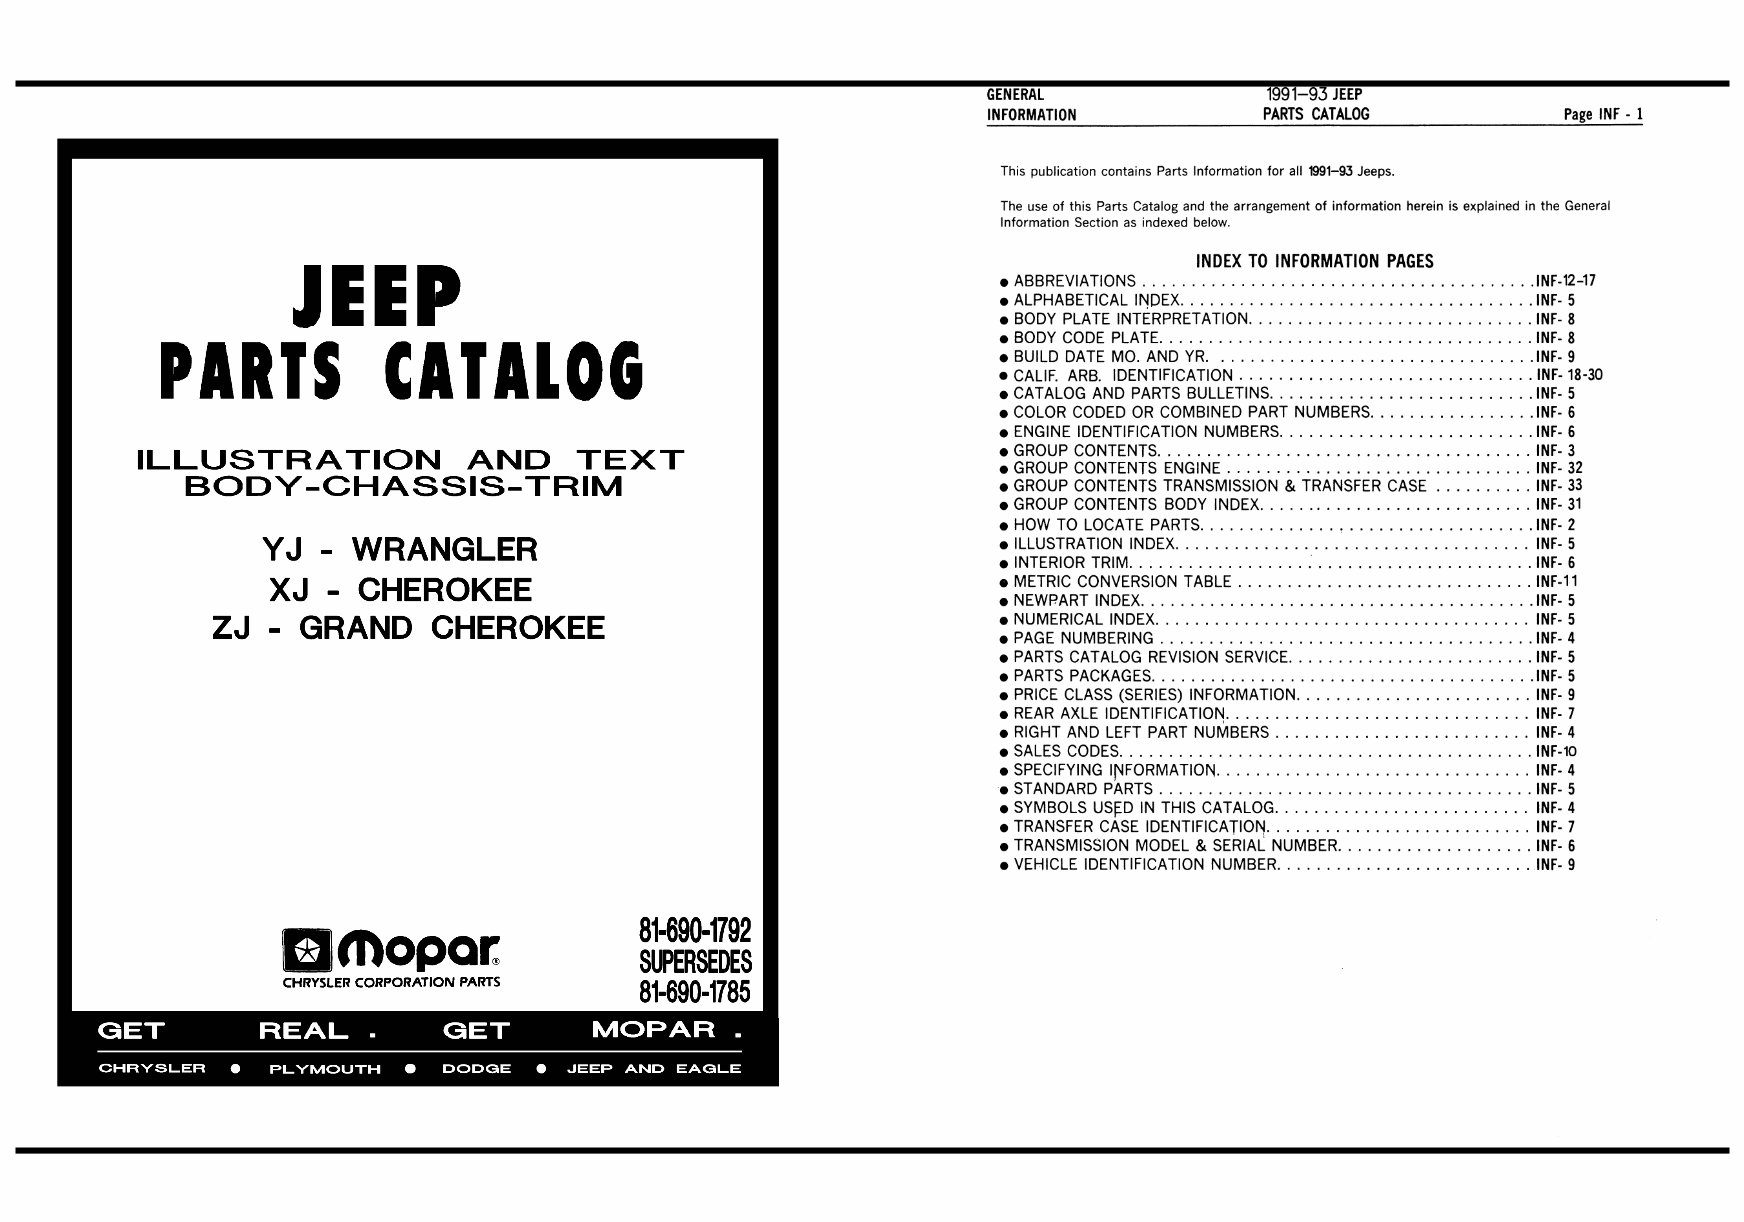 JEEP WRANGLER YJ Replacement Parts Manual 1991-1993